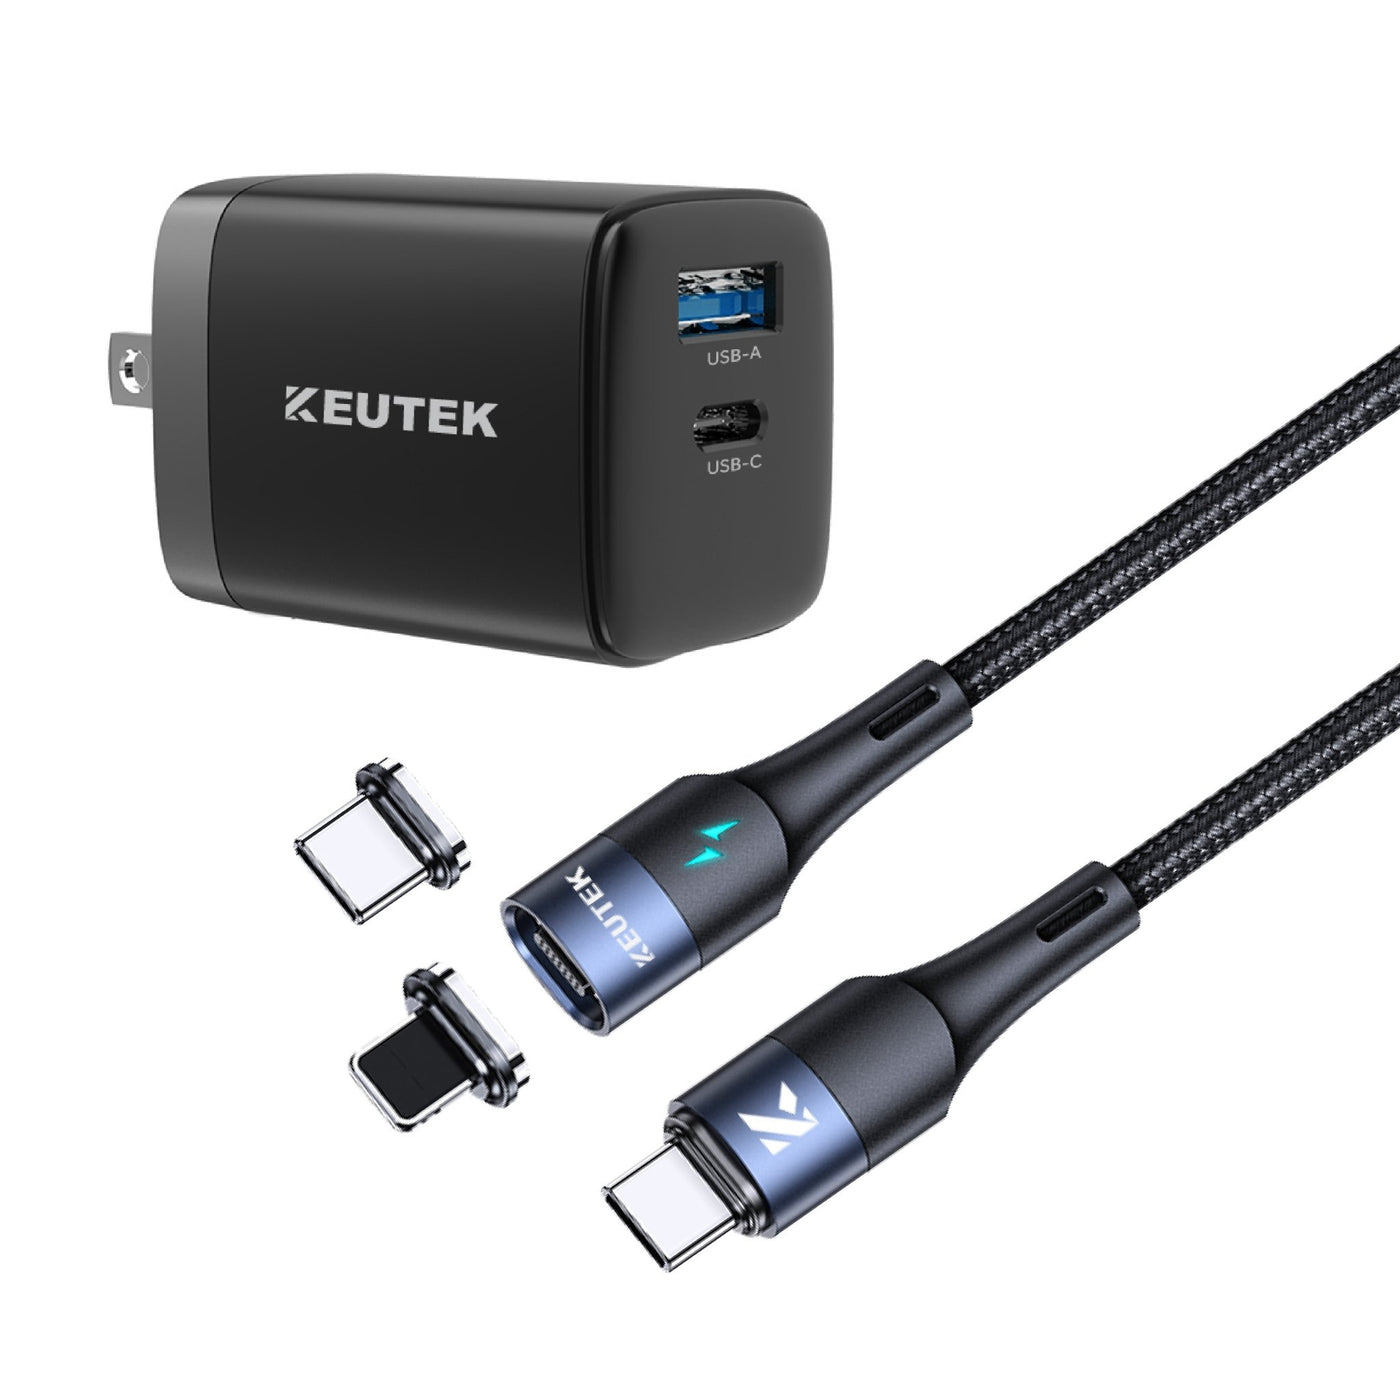 ProSeries USB-C Fast Charging Cable + Wall Charger Bundle (+2 Tips) - KEUTEK